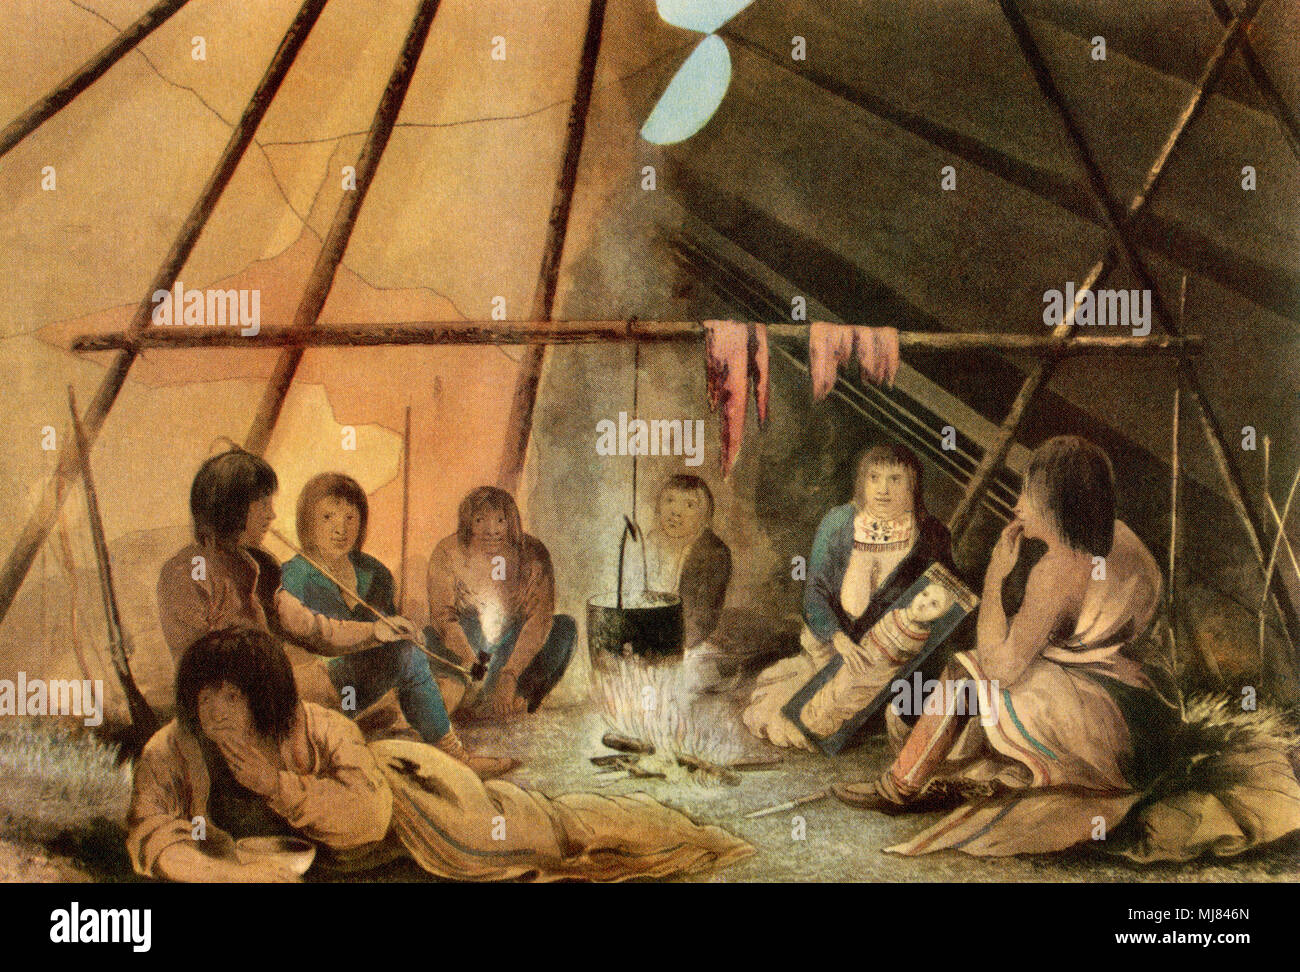 Interior of a Cree Indian Tent. After a coloured aquatint from Sir John Franklin's Narrative of a Journey to the Shores of the Polar Sea, 1819-1822.  From British Polar Explorers, published 1943. Stock Photo